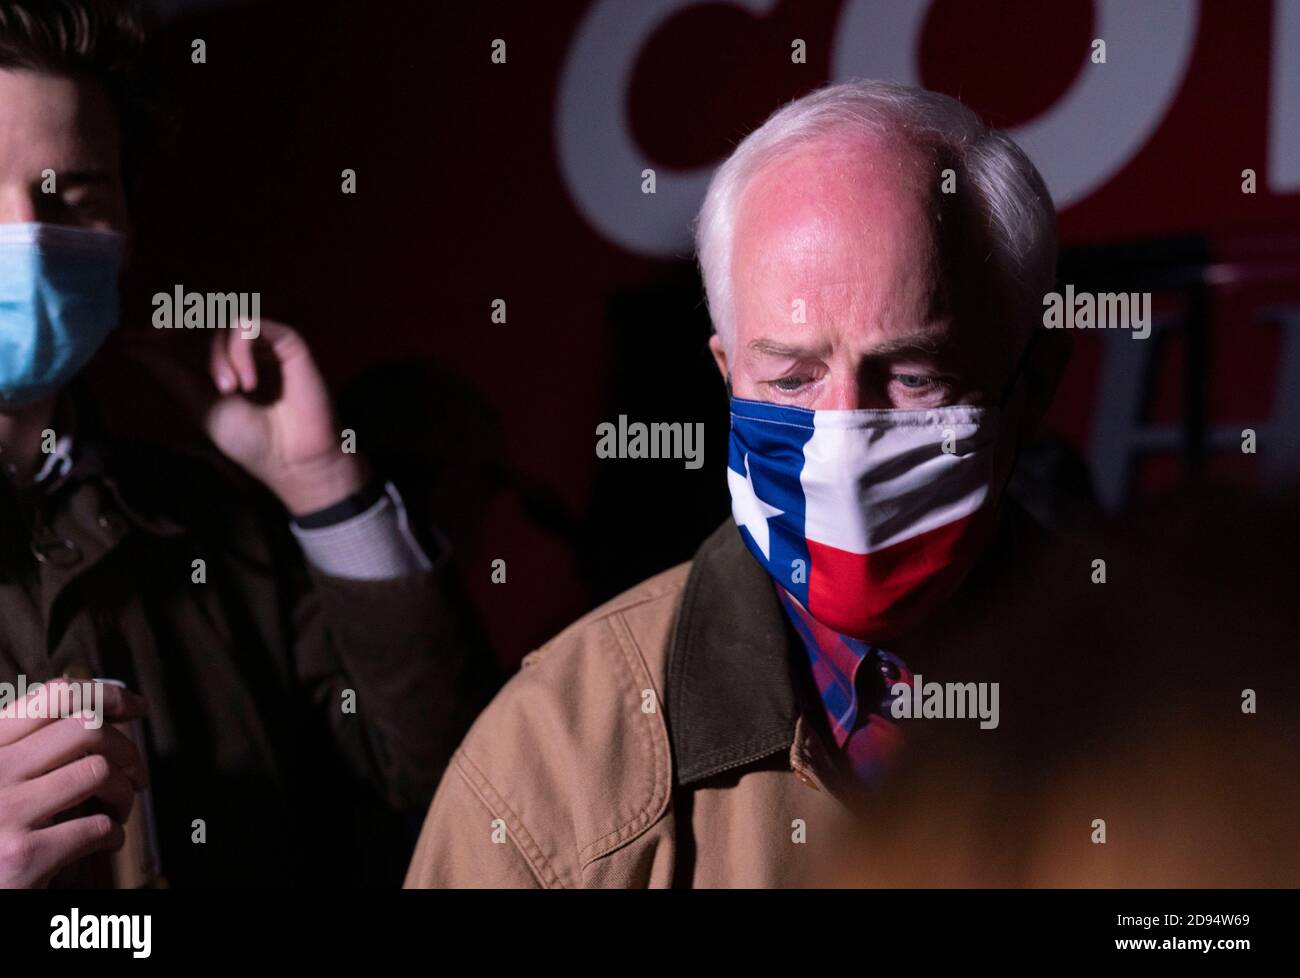 Dripping Springs, Texas, USA. 2nd November, 2020. Republican U.S. Senator John Cornyn wears a Texas flag-themed mask as he arrives at a private ranch to wrap up his campaign for a fourth term in the U.S. Senate. Cornyn is fighting off a challenge from Democrat MJ Hegar, a decorated Army veteran and political novice. Credit: Bob Daemmrich/Alamy Live News Stock Photo